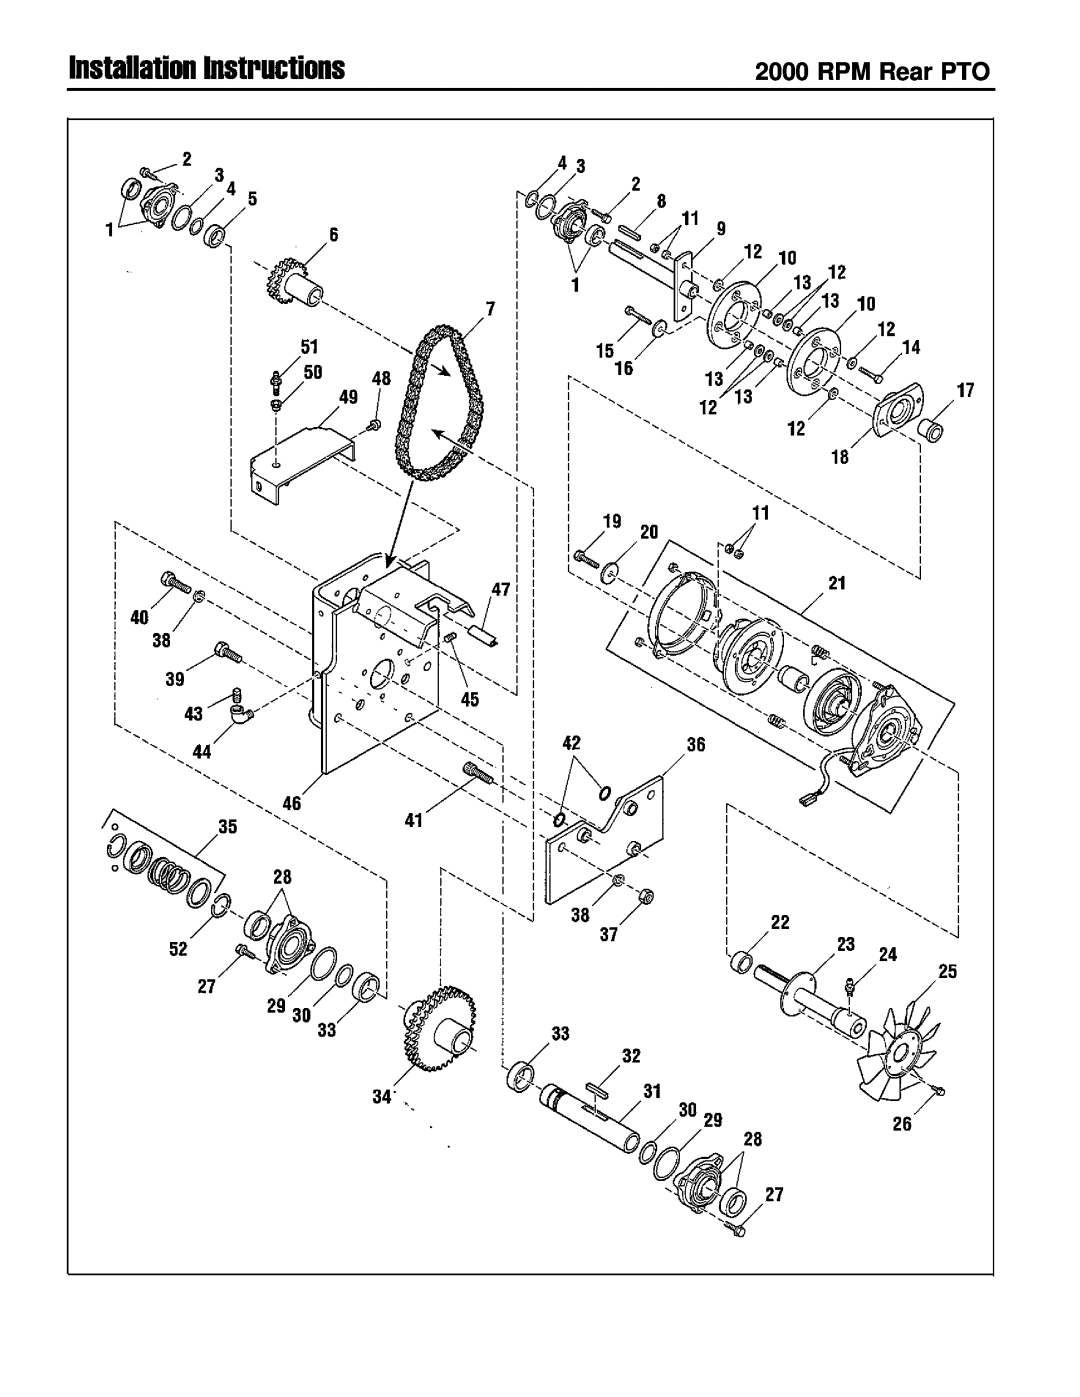 Simplicity 2900 Series, 2000 Series installation instructions RPM Rear PTO 